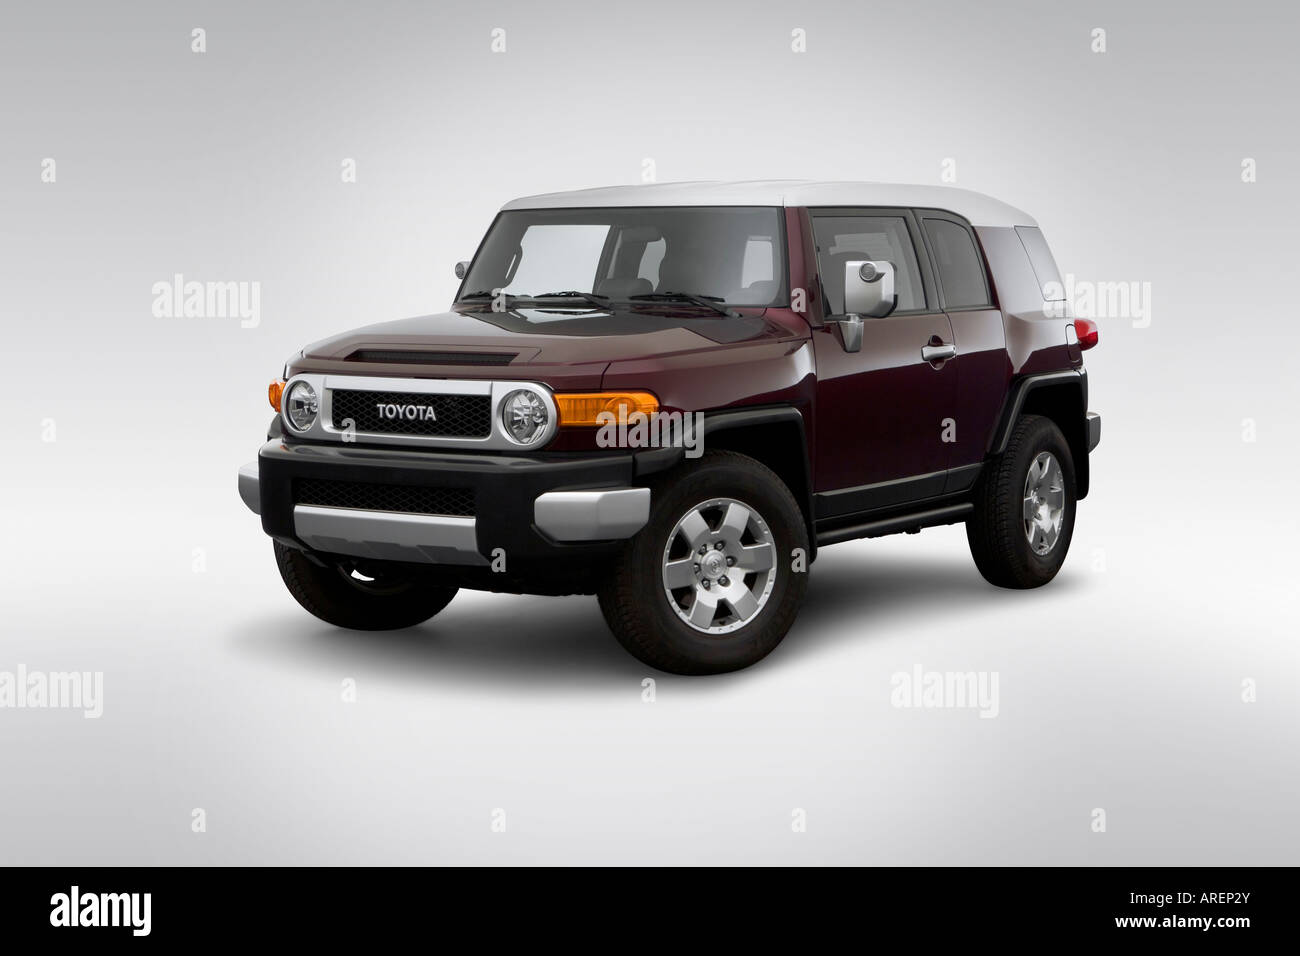 2007 Toyota Fj Cruiser In Red Front Angle View Stock Photo